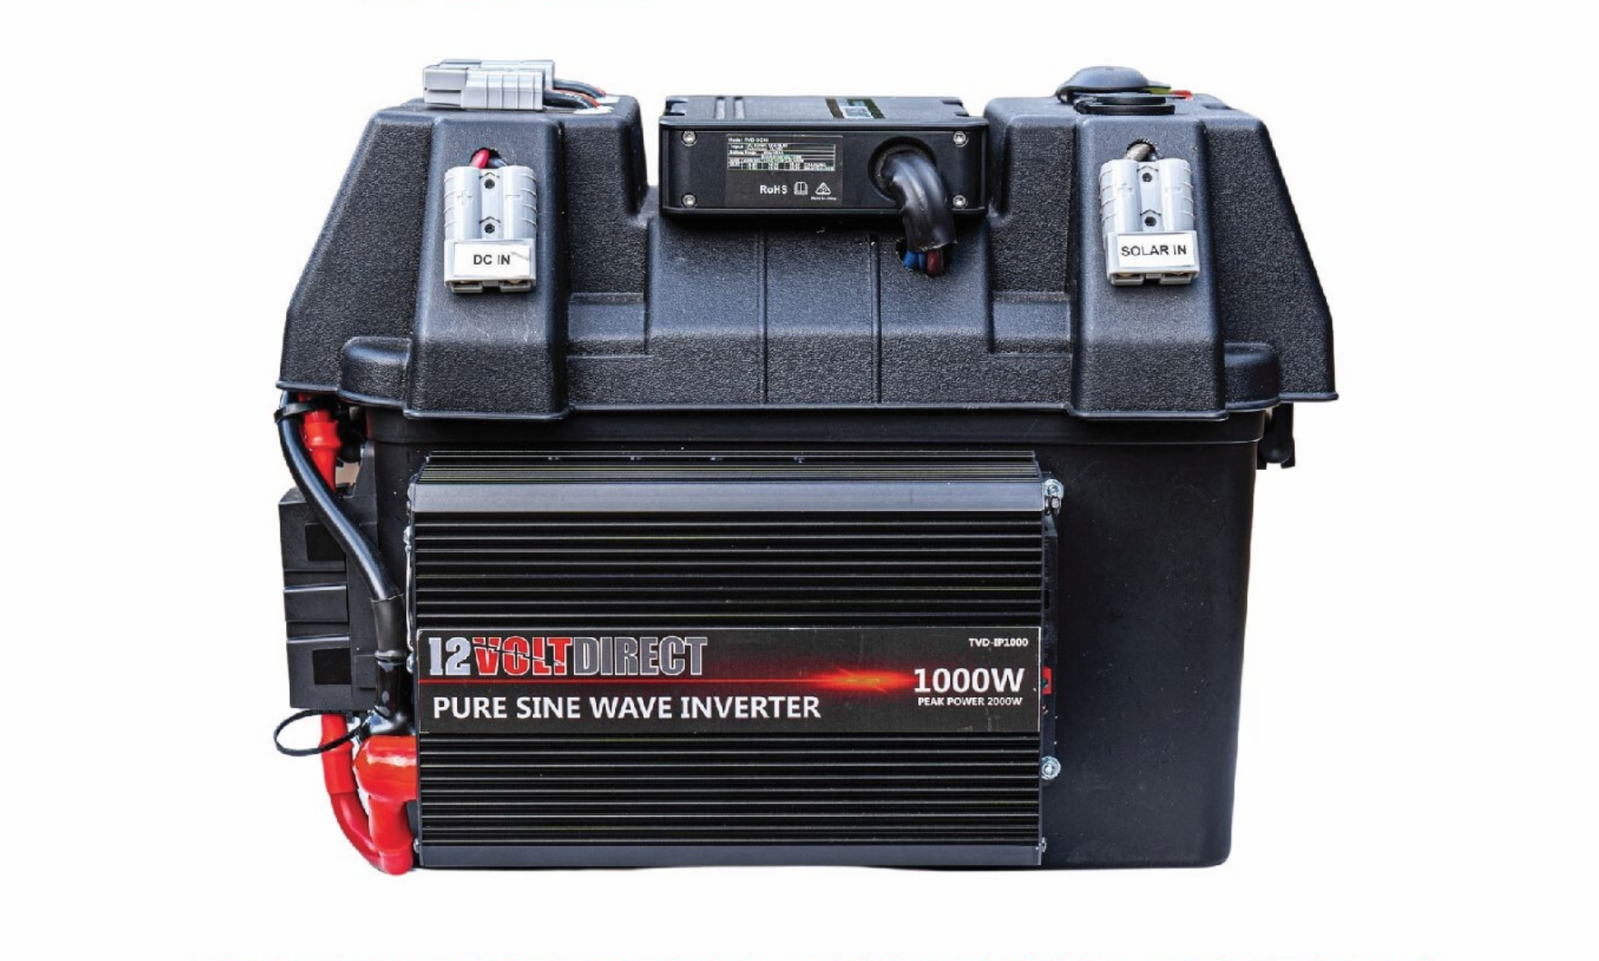 How to Connect a Battery, 12 Volt Inverter, and Charger 